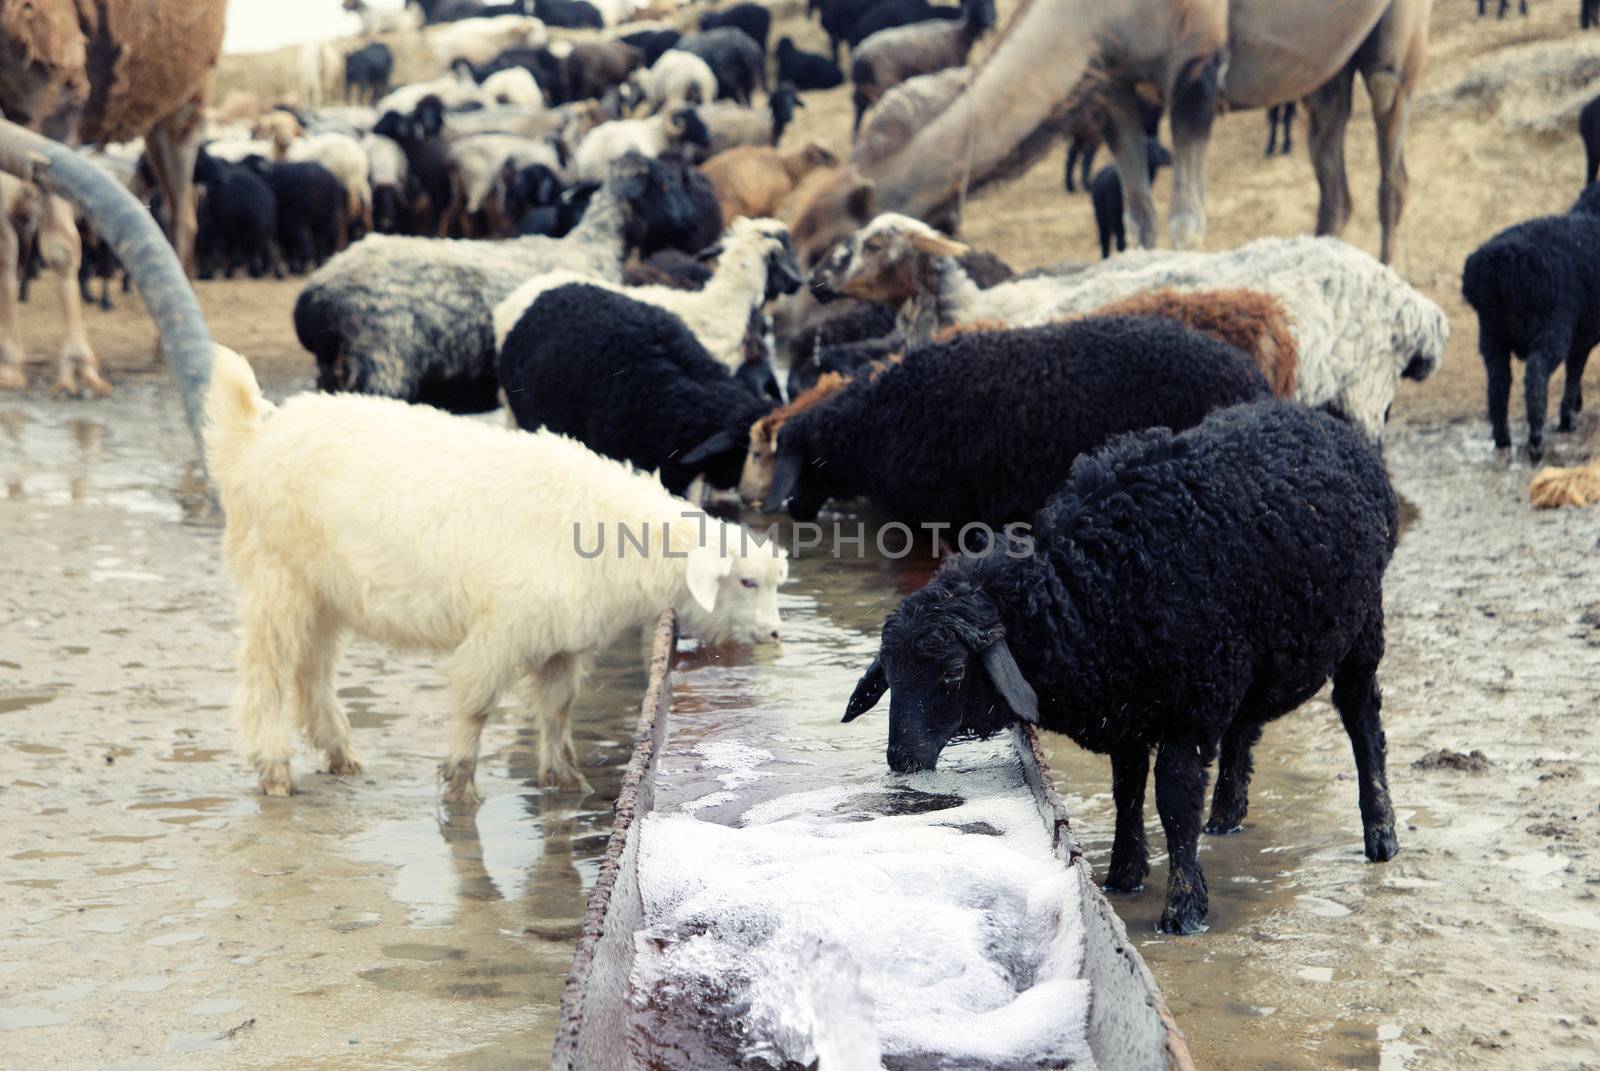 Sheep drinking at the watering place. Middle Asia. Natural light and colors